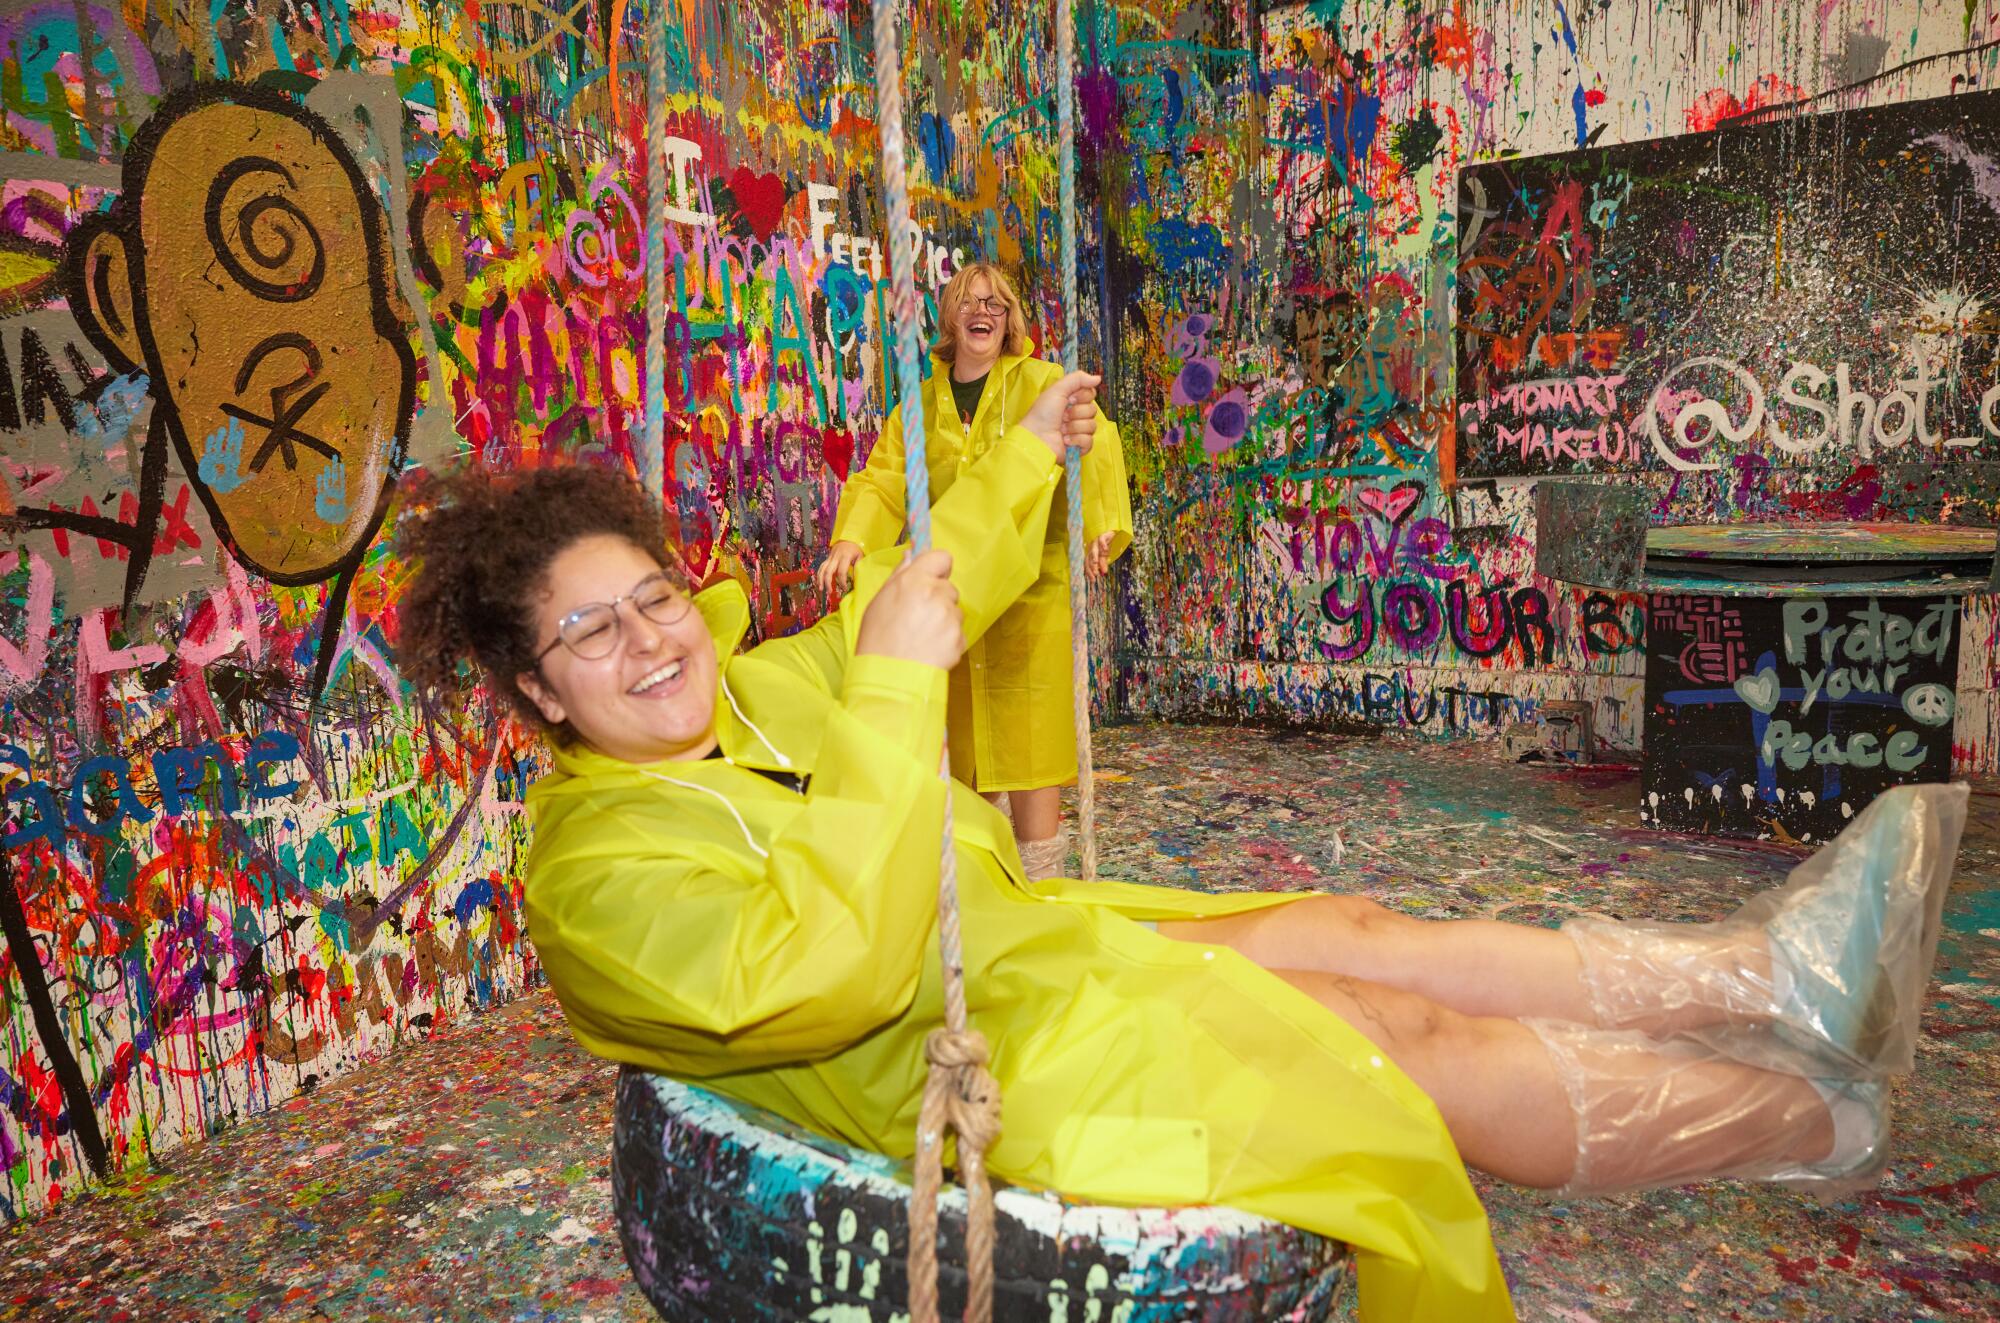 A person wearing a yellow raincoat smiles on a tire swing.